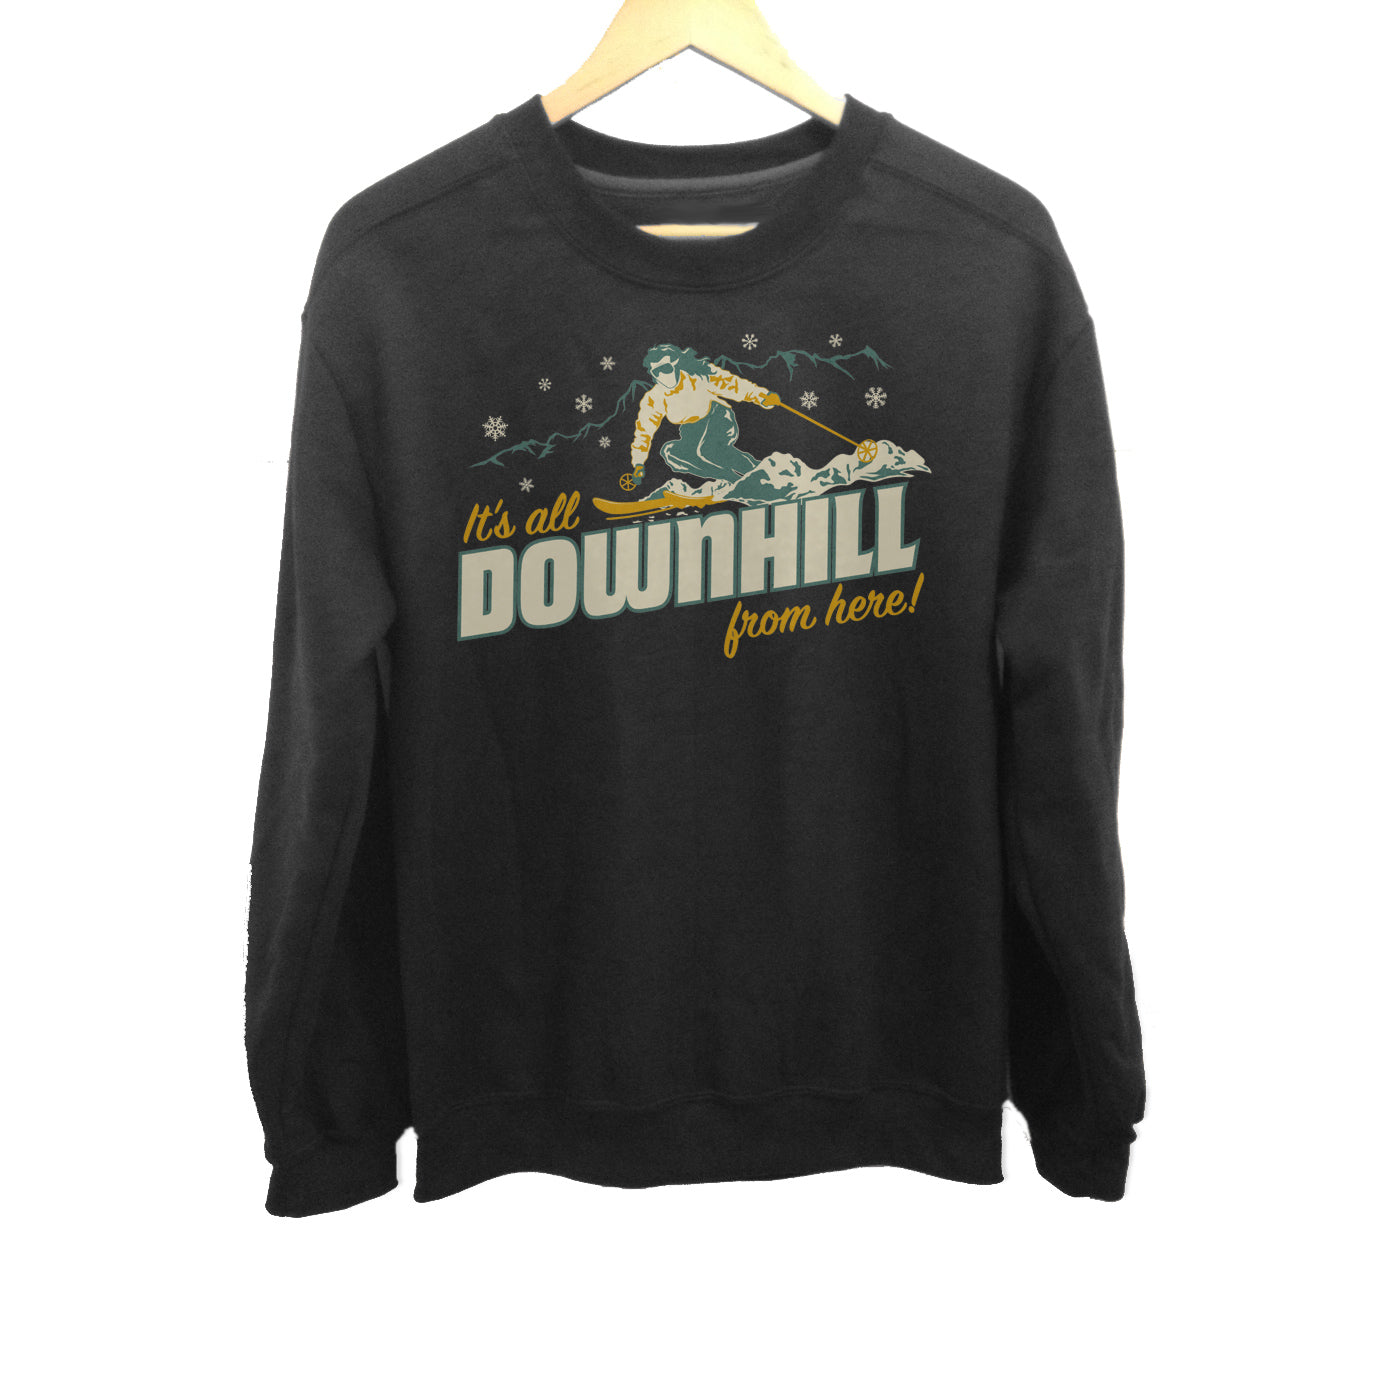 Unisex It's All Downhill From Here Sweatshirt